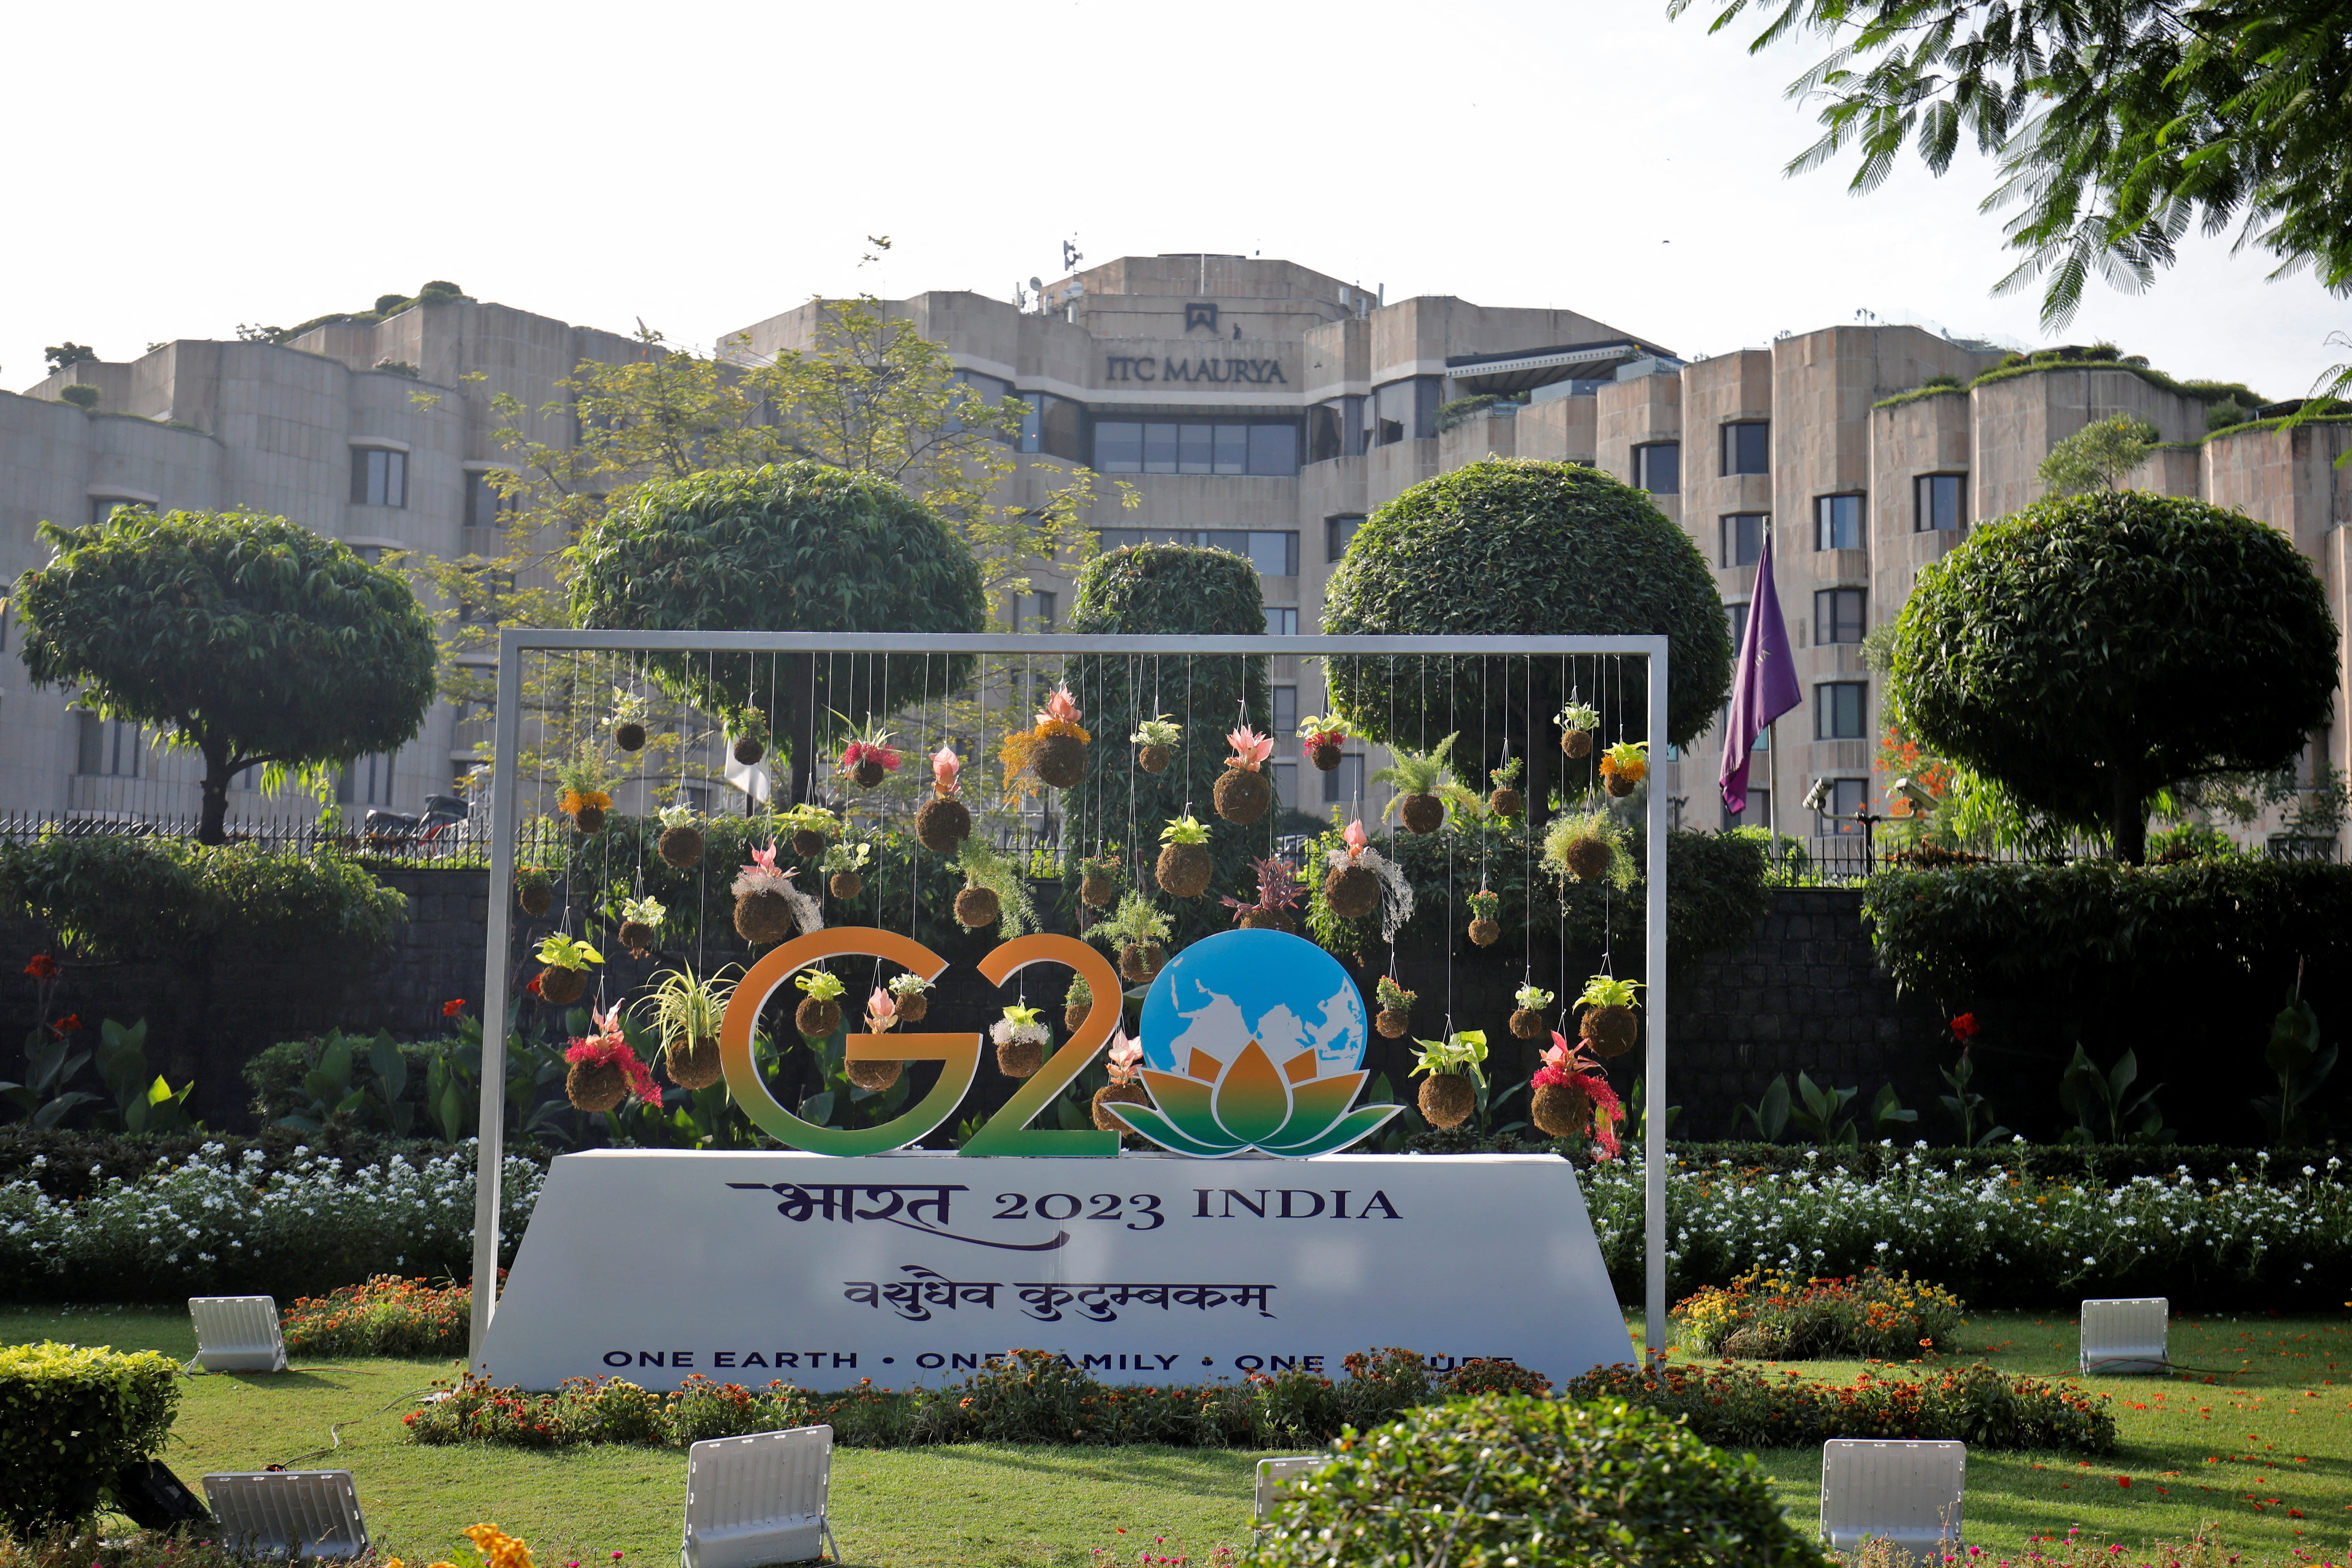 A model of G20 is pictured outside ITC Maurya hotel ahead of the G20 Summit in New Delhi